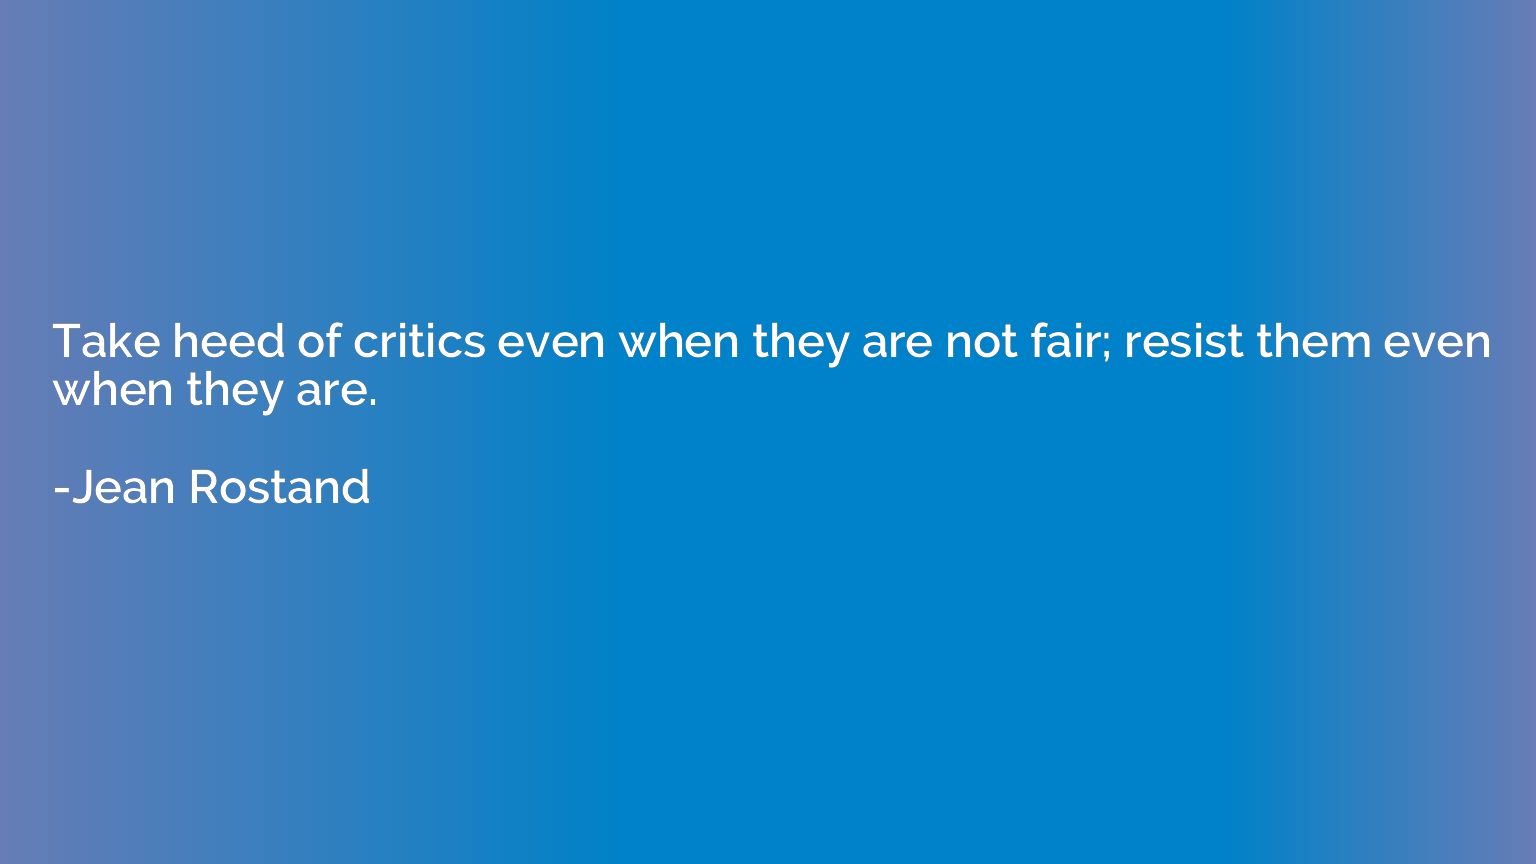 Take heed of critics even when they are not fair; resist the